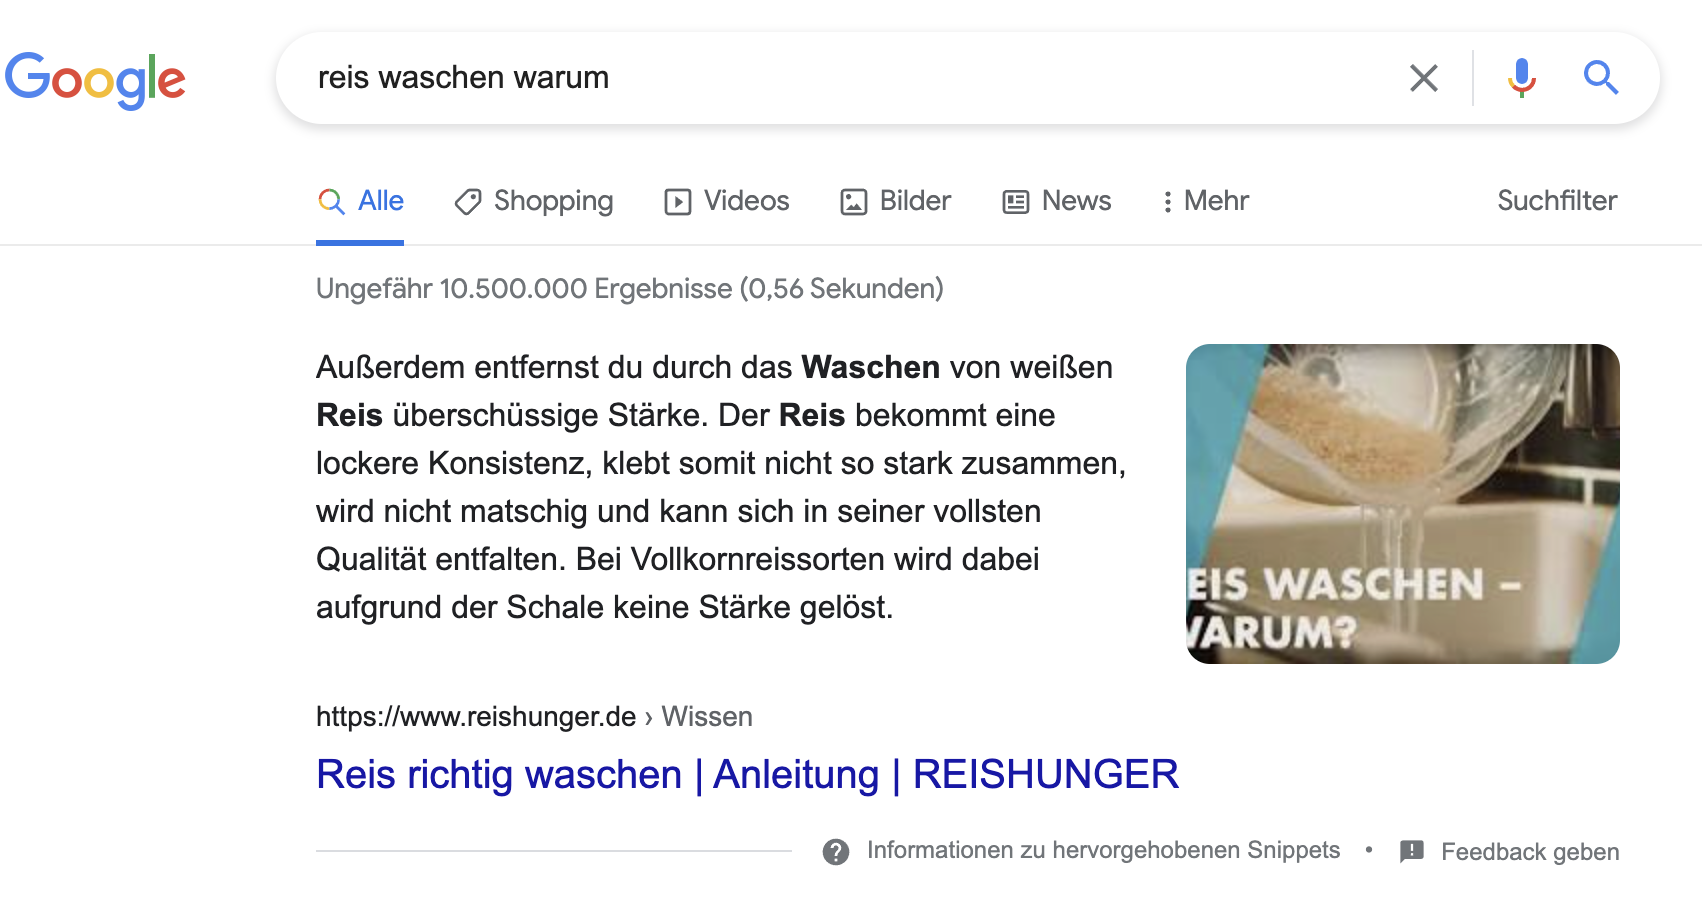 Featured Snippet mit hoher CTR